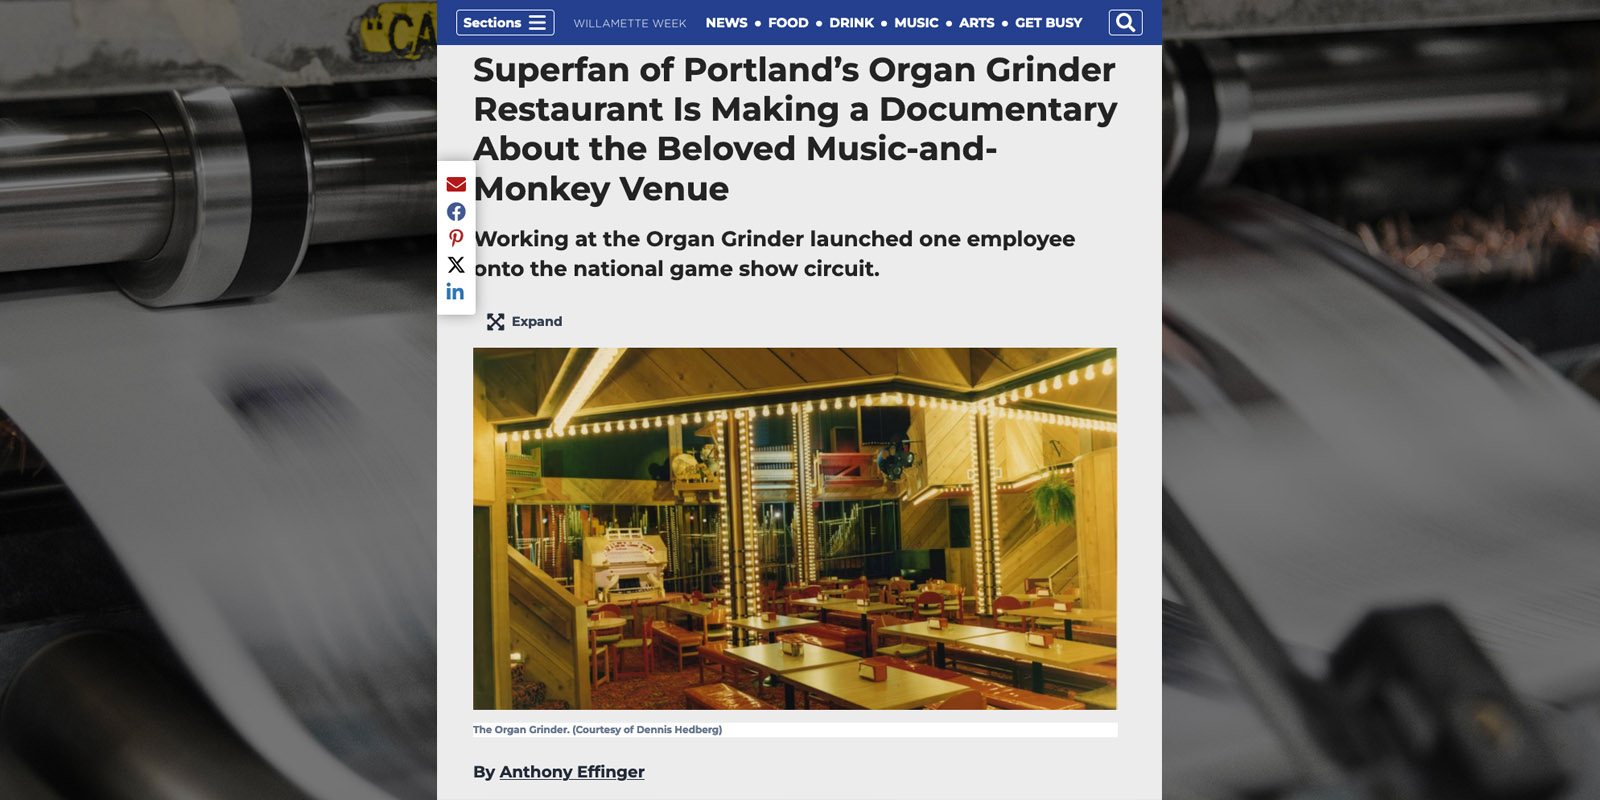 Screen shot of the top portion of an article about the Organ Grinder Documentary Project from Willamette Week newspaper.